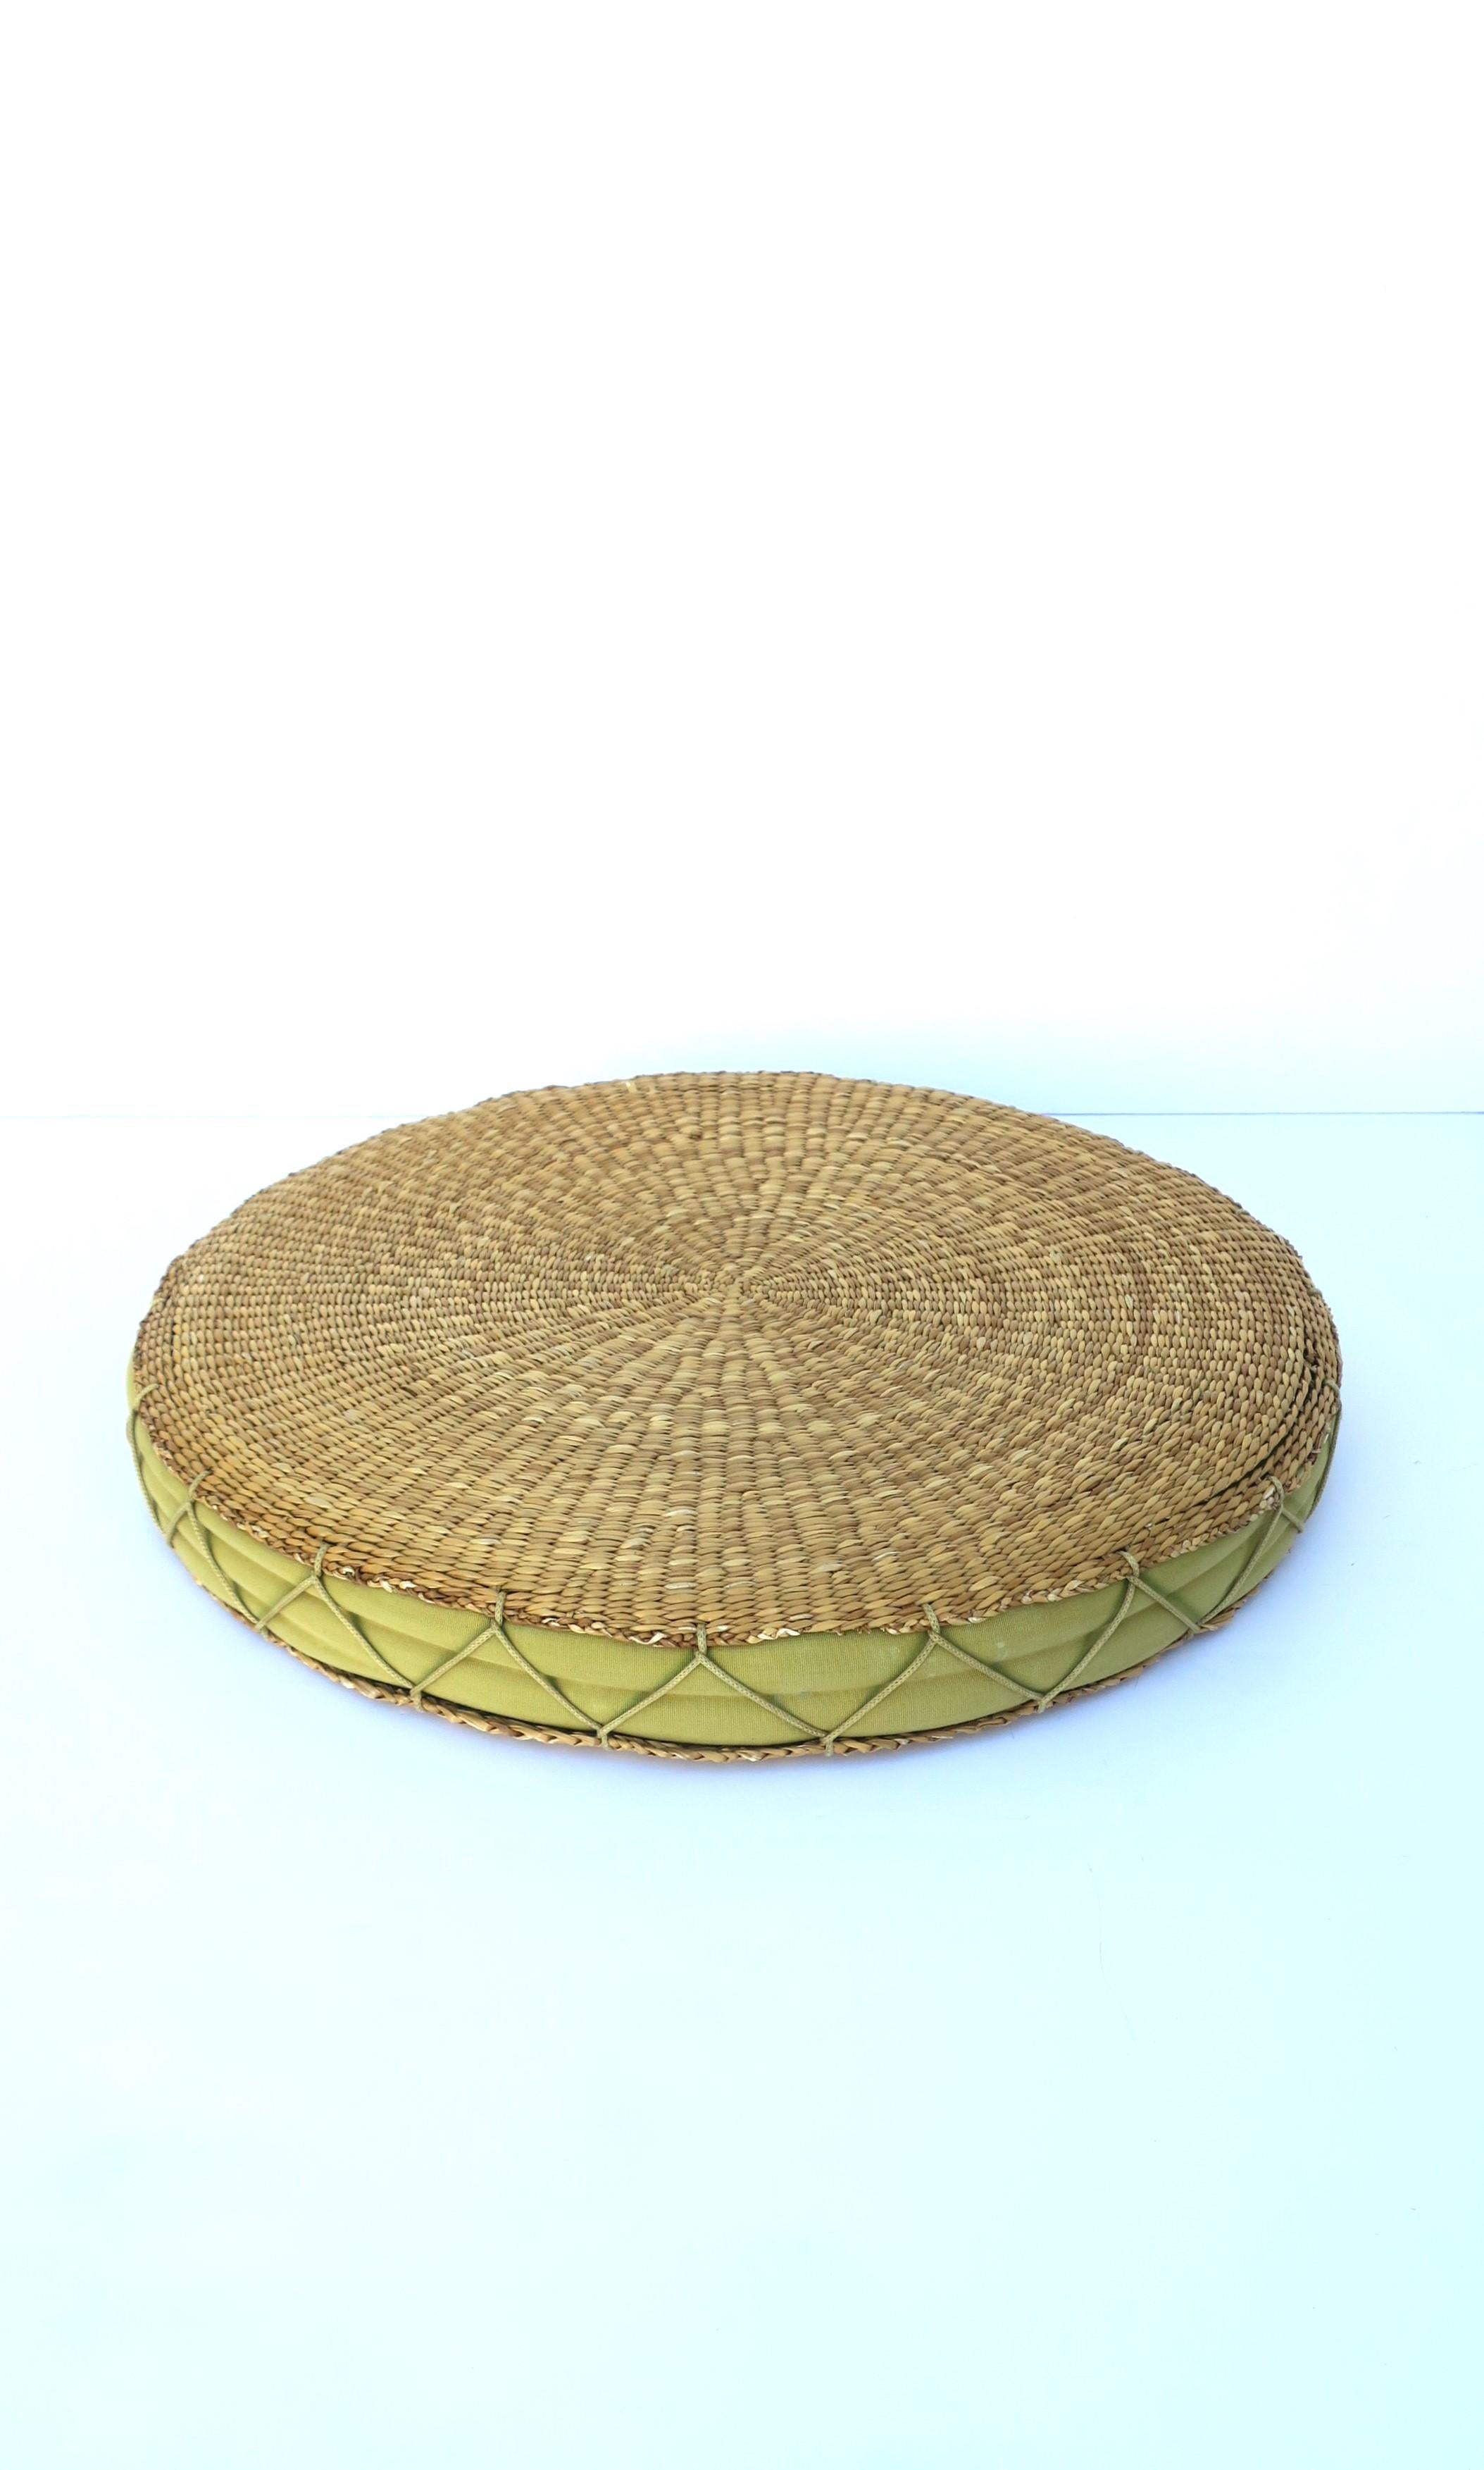 A vintage wicker light-green seat or floor cushion with cotton insert and large 'X' stitching around, circa mid to late-20th century. Piece could also be used as a tray to hold light items as demonstrated with coral piece. 

Dimensions: 18